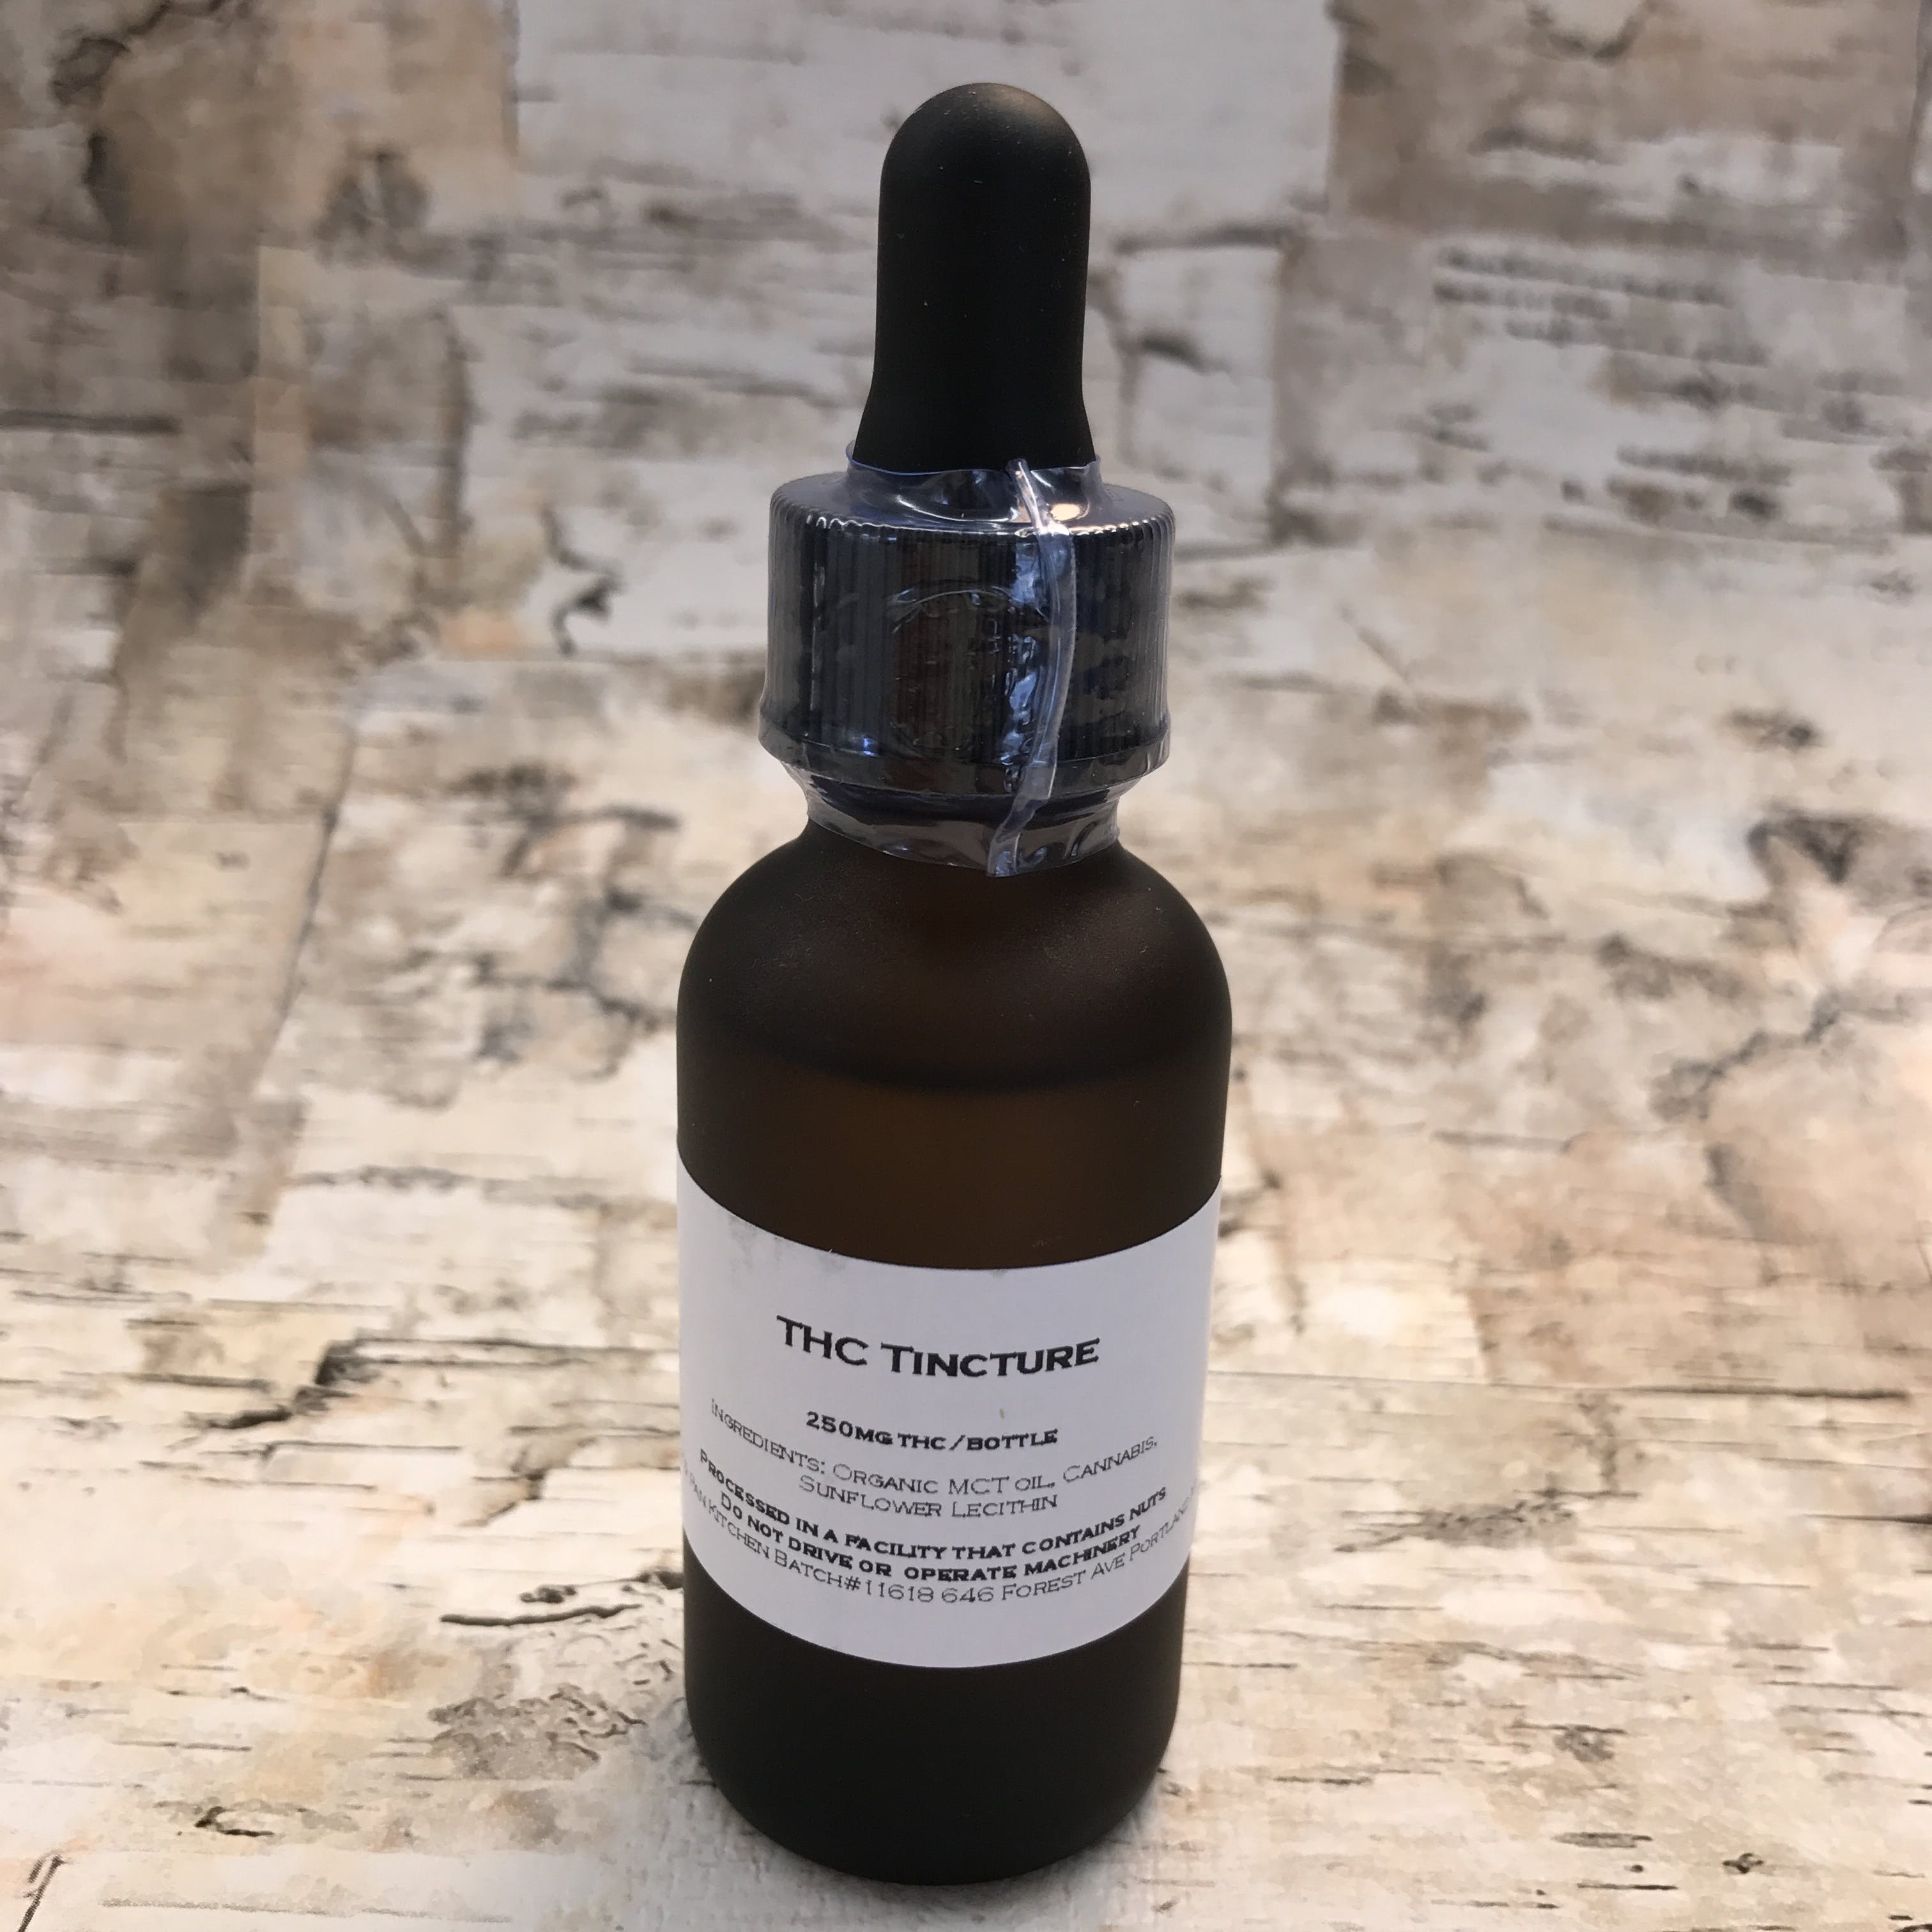 tincture-thc-tincture-3b-250mgbottle-mct-oil